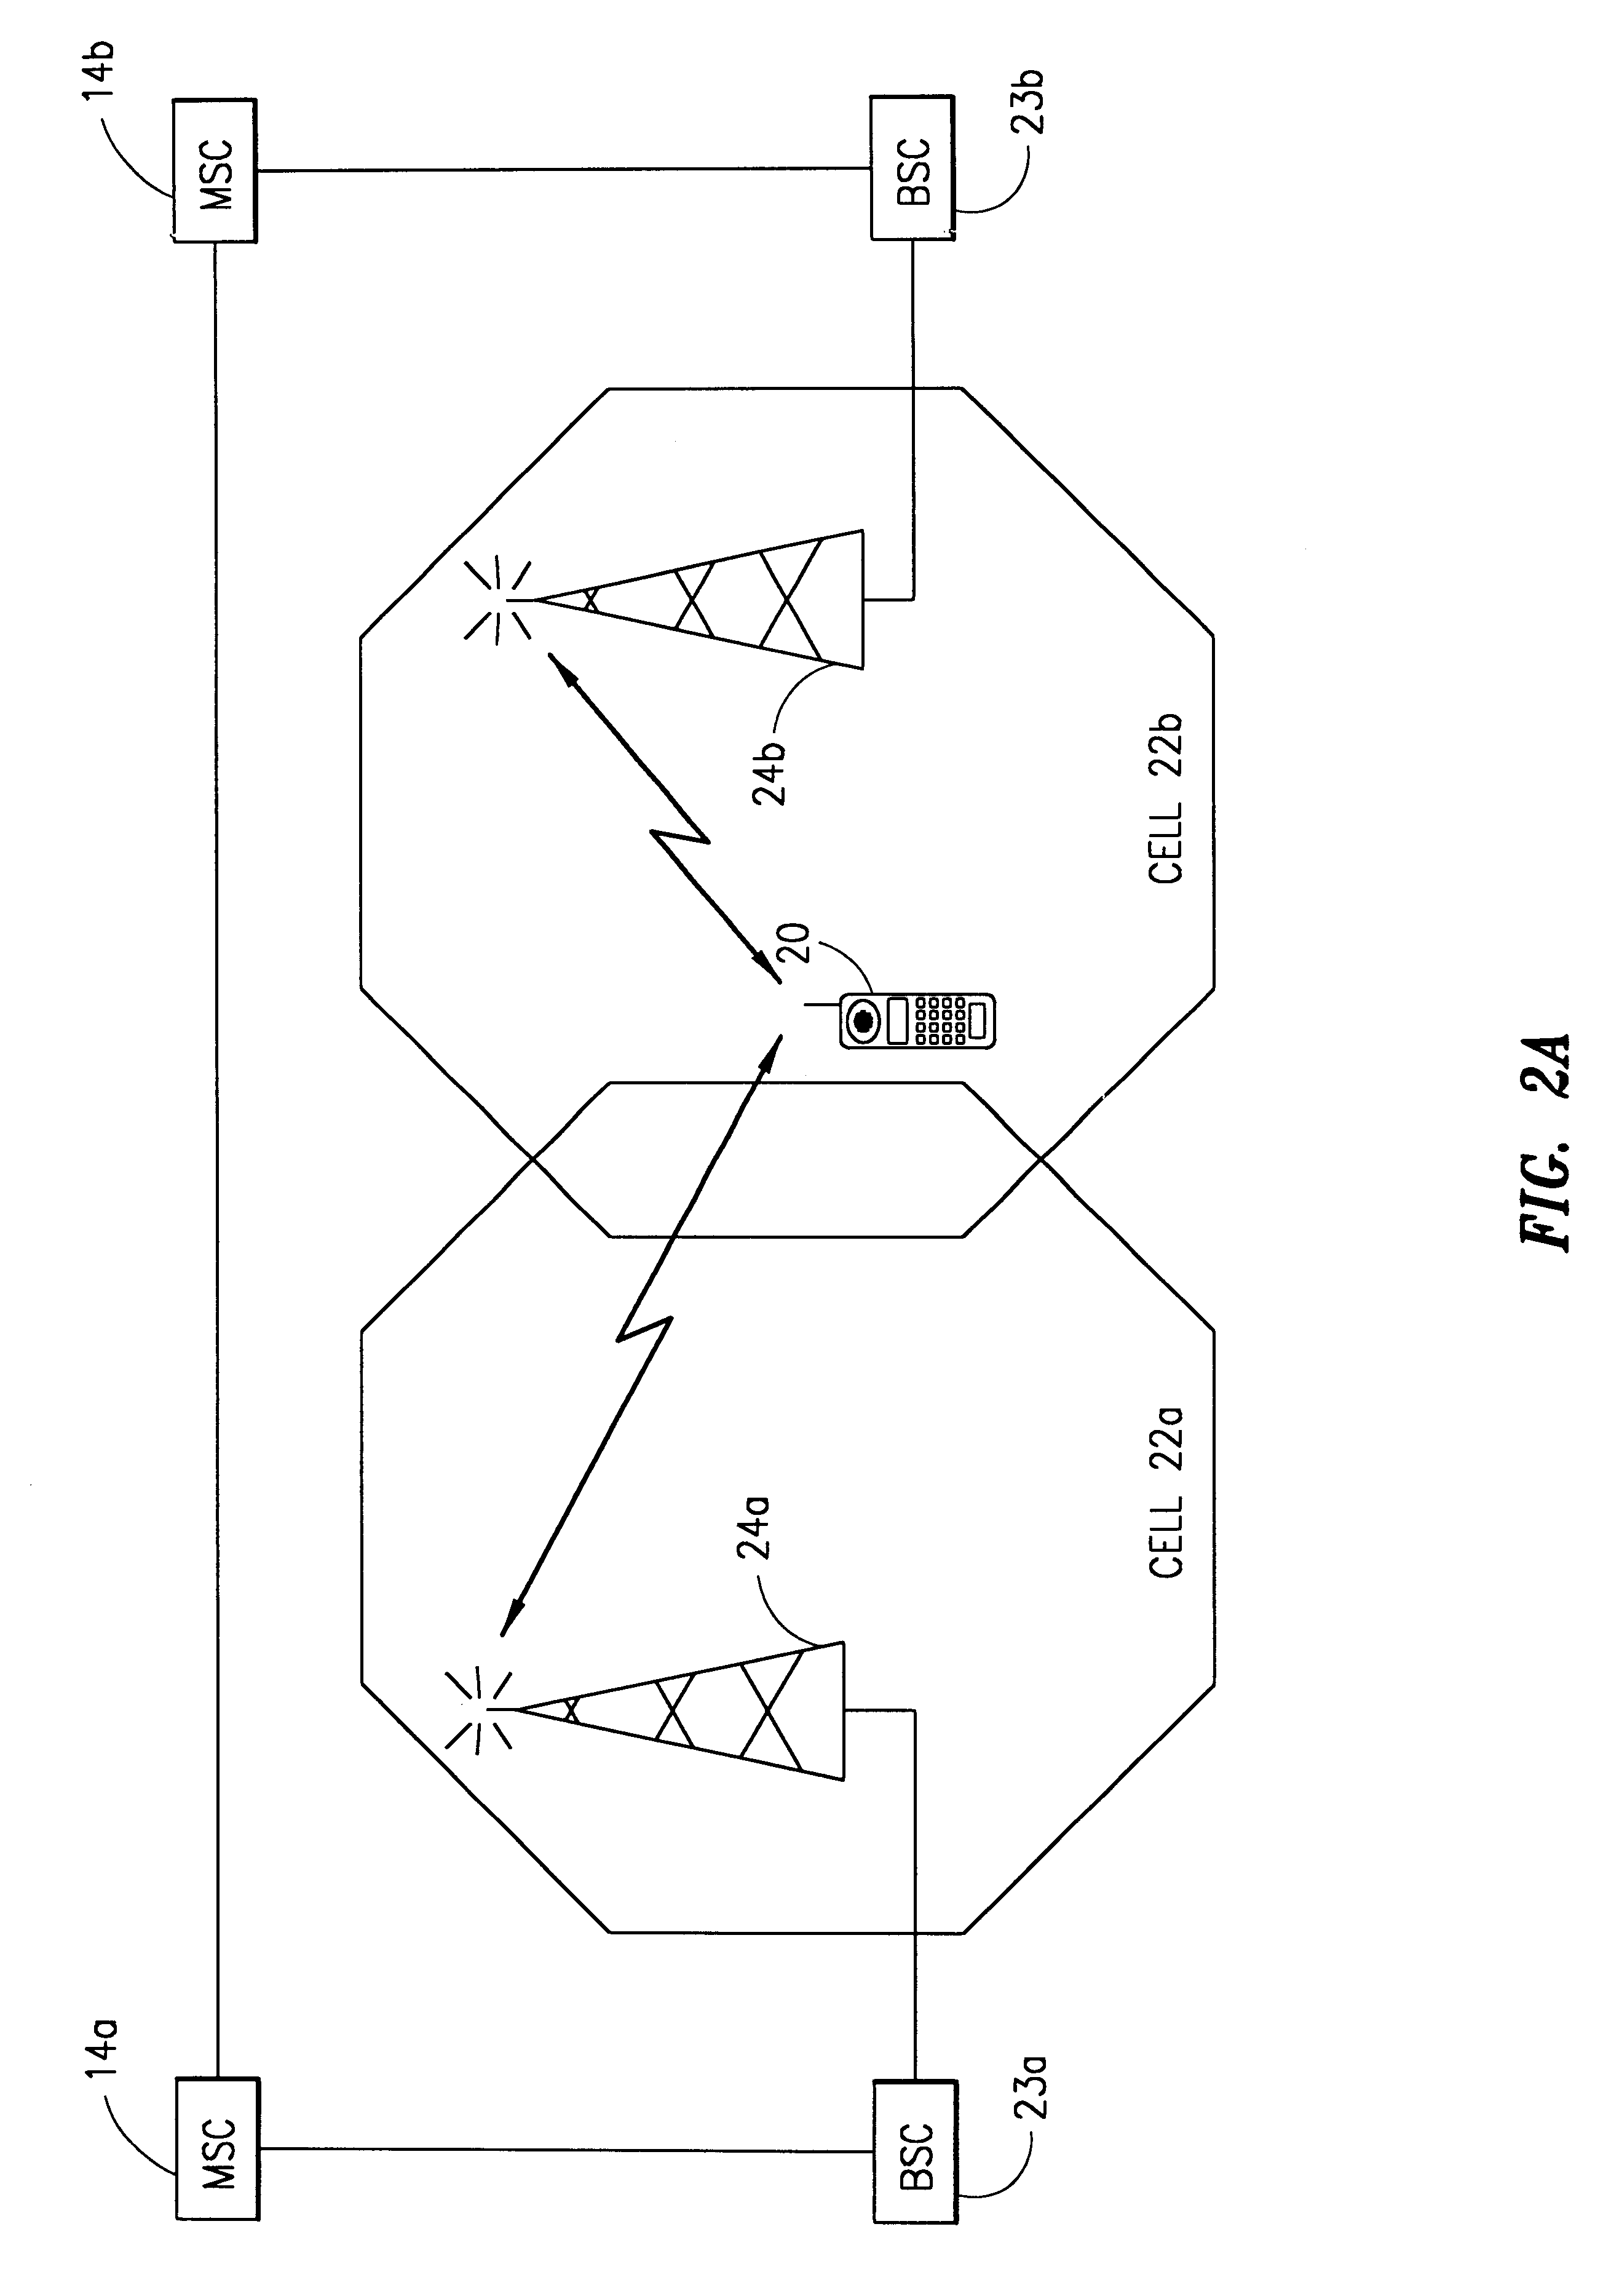 System and method for performing an inter mobile system handover using the internet telephony system